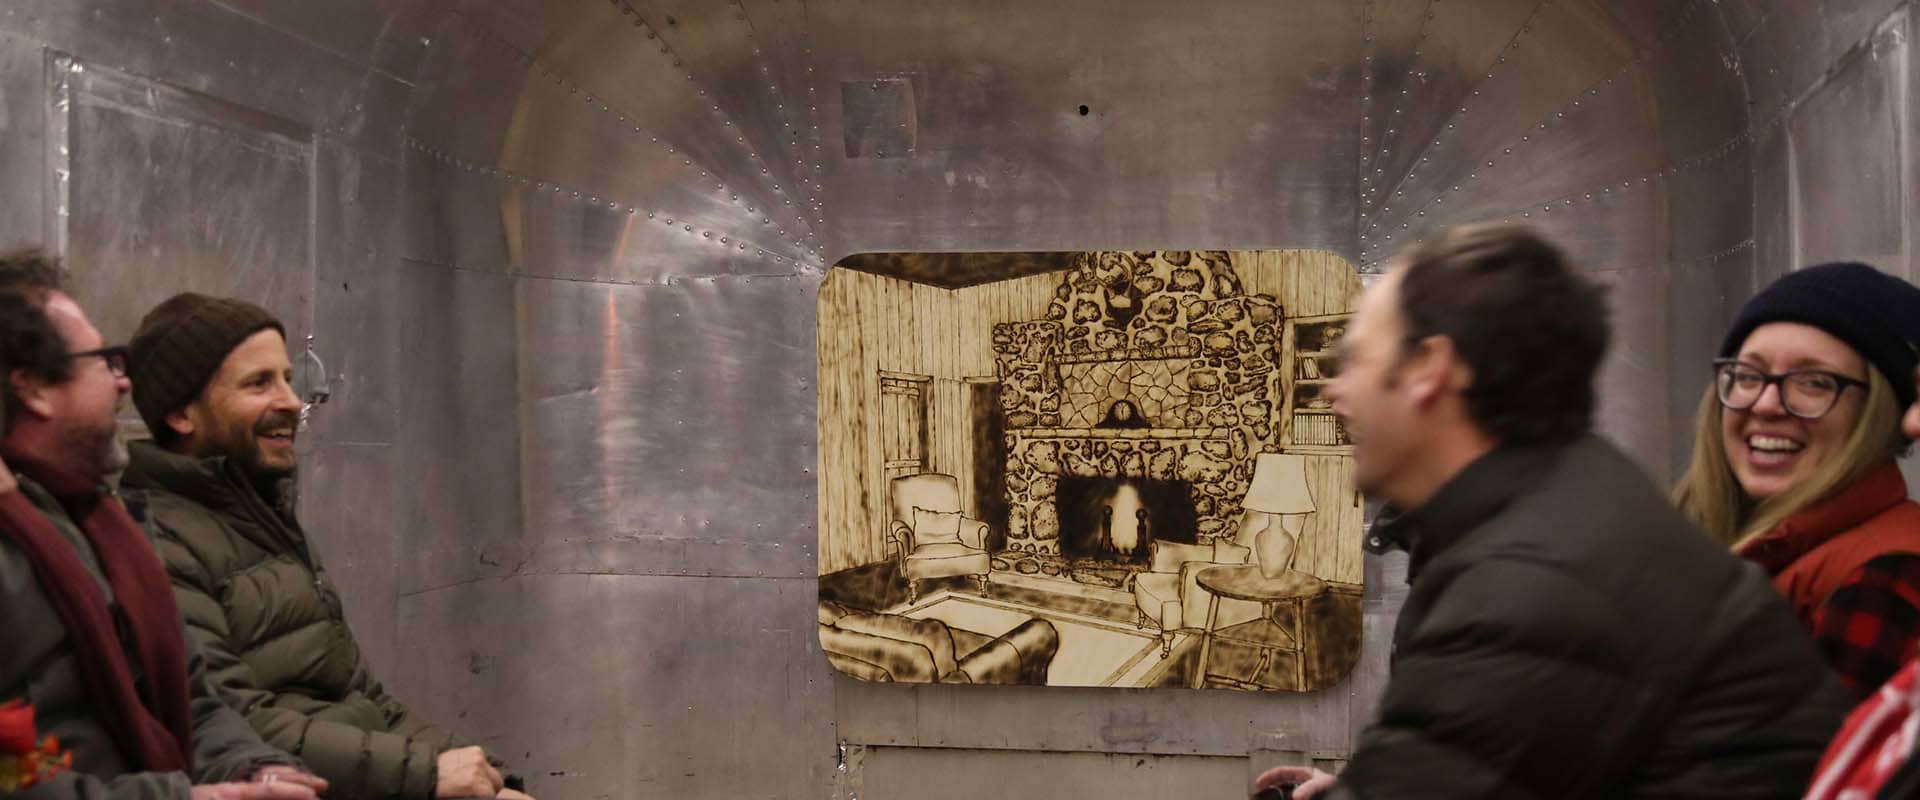 People wearing winter jackets sit smiling and talking in a space with wood-burned artwork and metal walls.